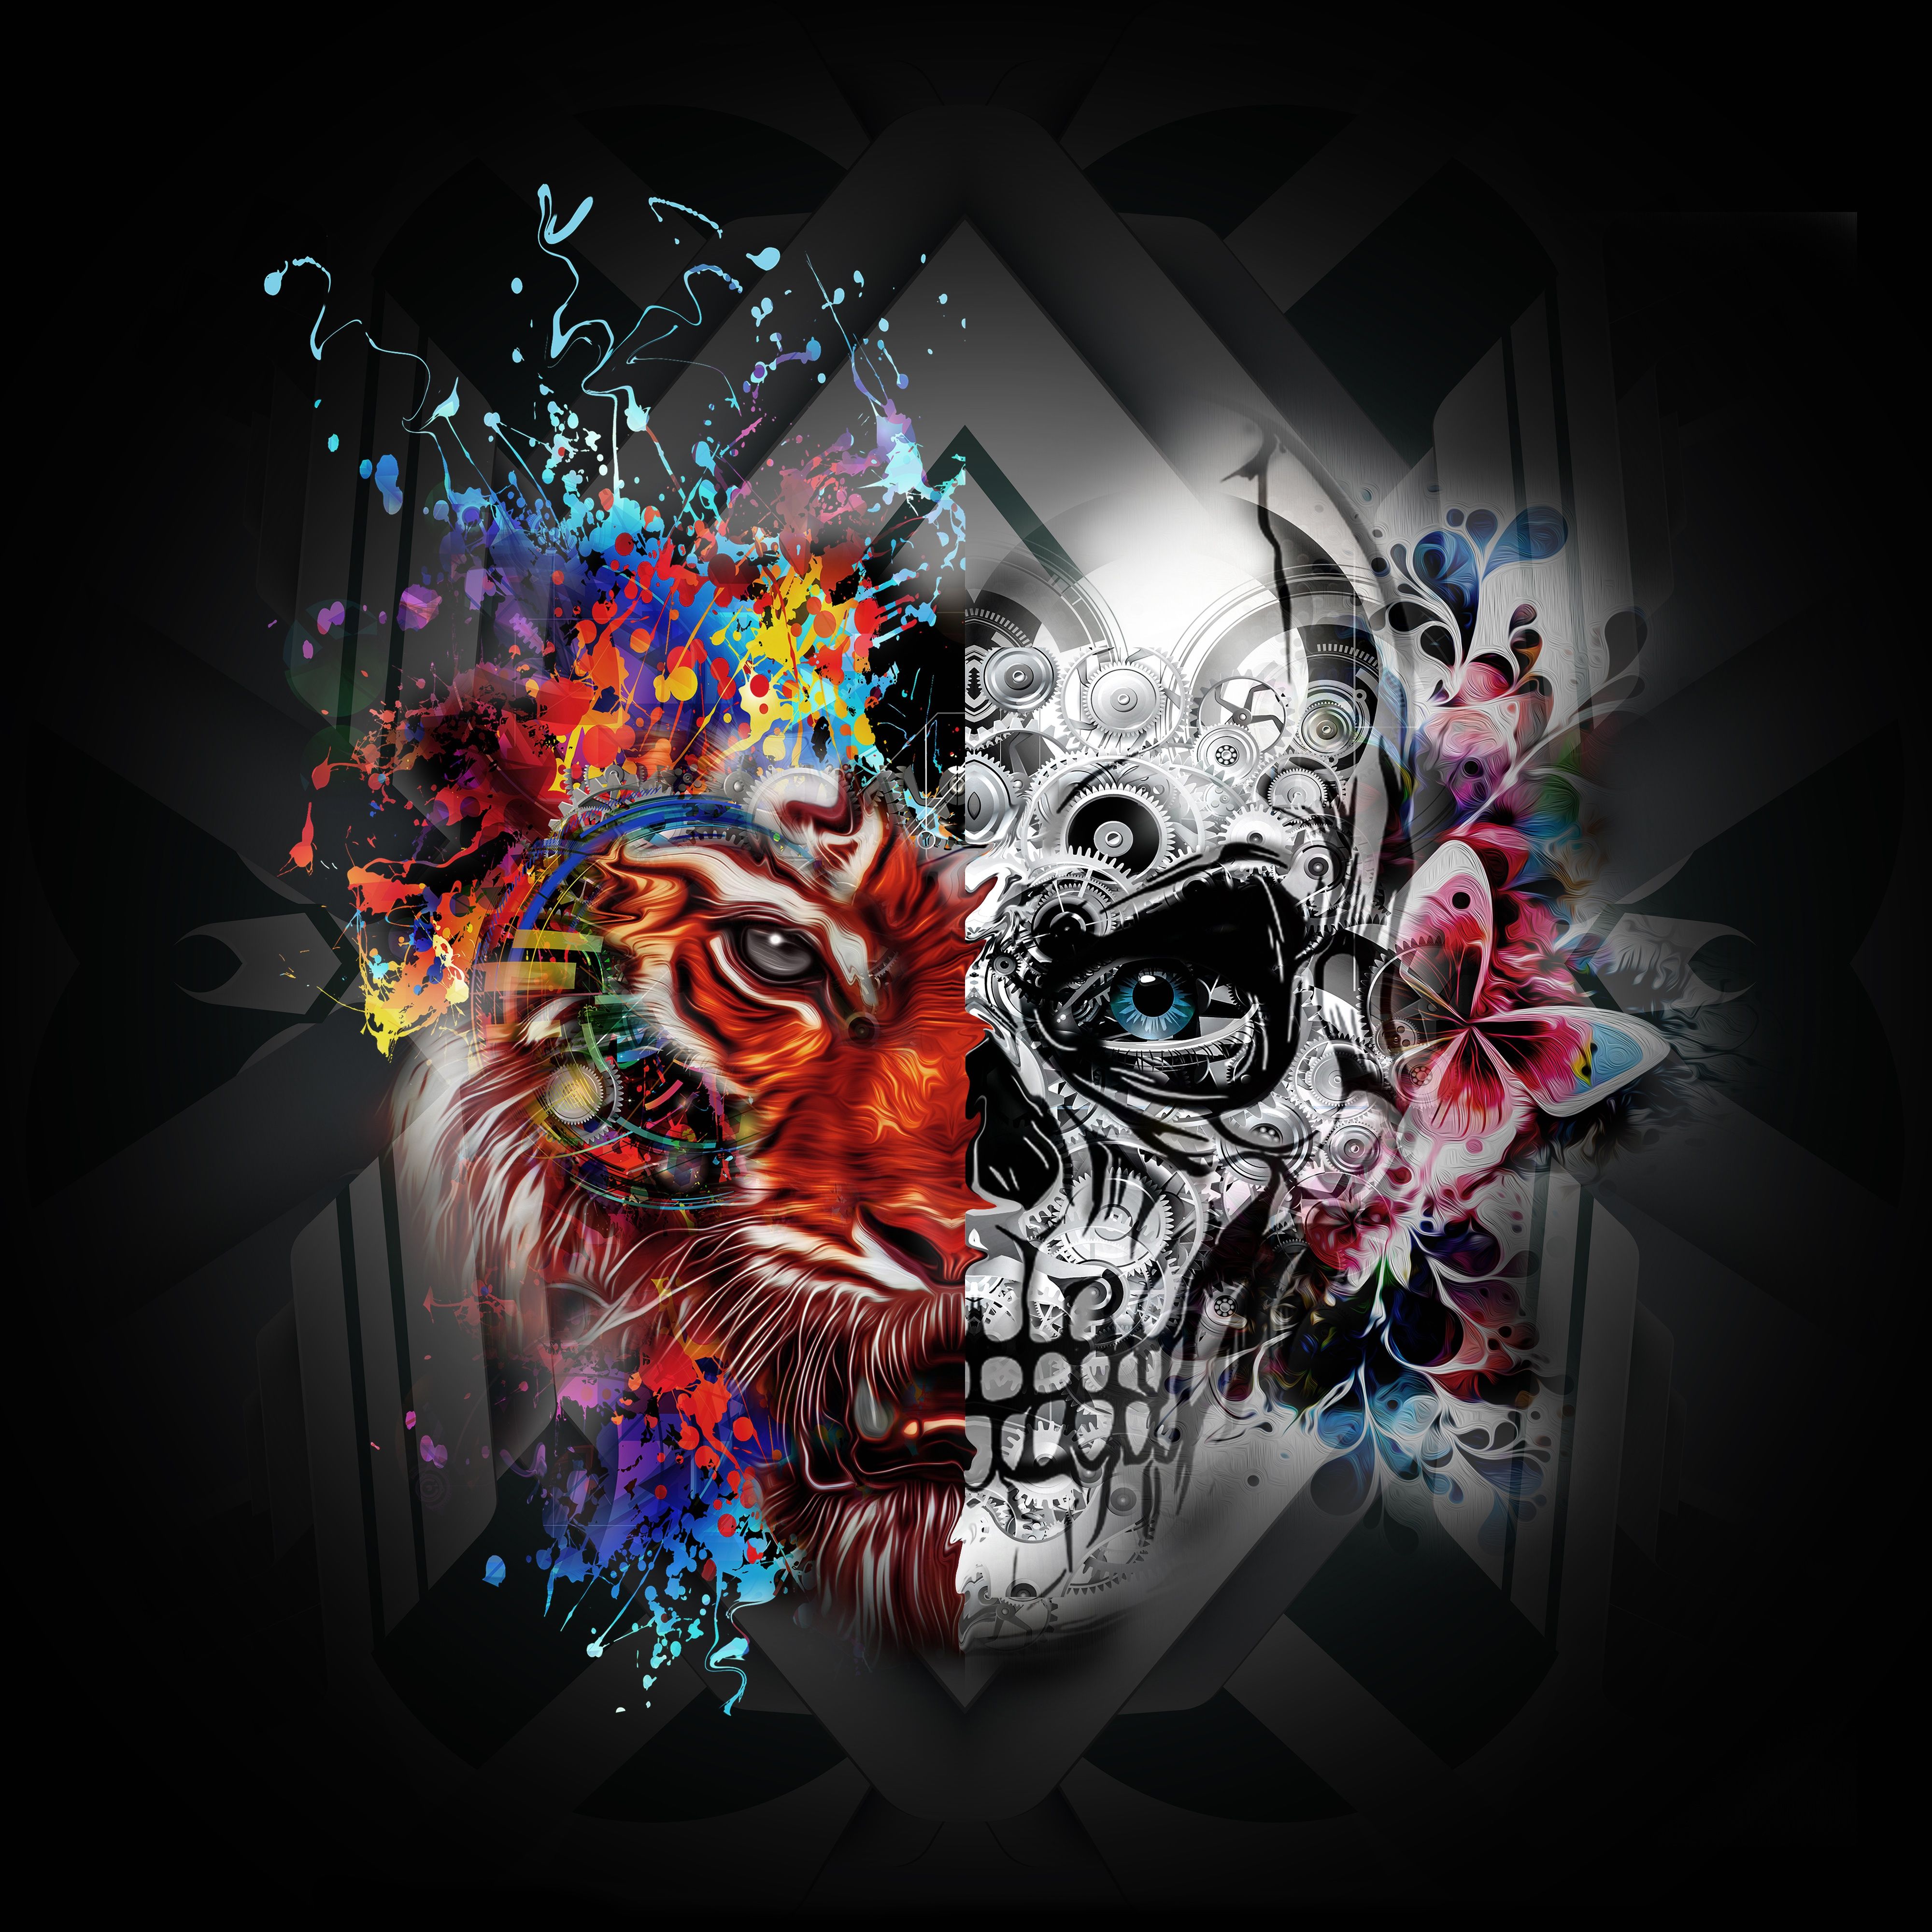 Download Cool Wallpaper Backgrounds In 4k, 8k Hd Quality - 5d Diamond  Painting Skull - 4000x4000 Wallpaper 